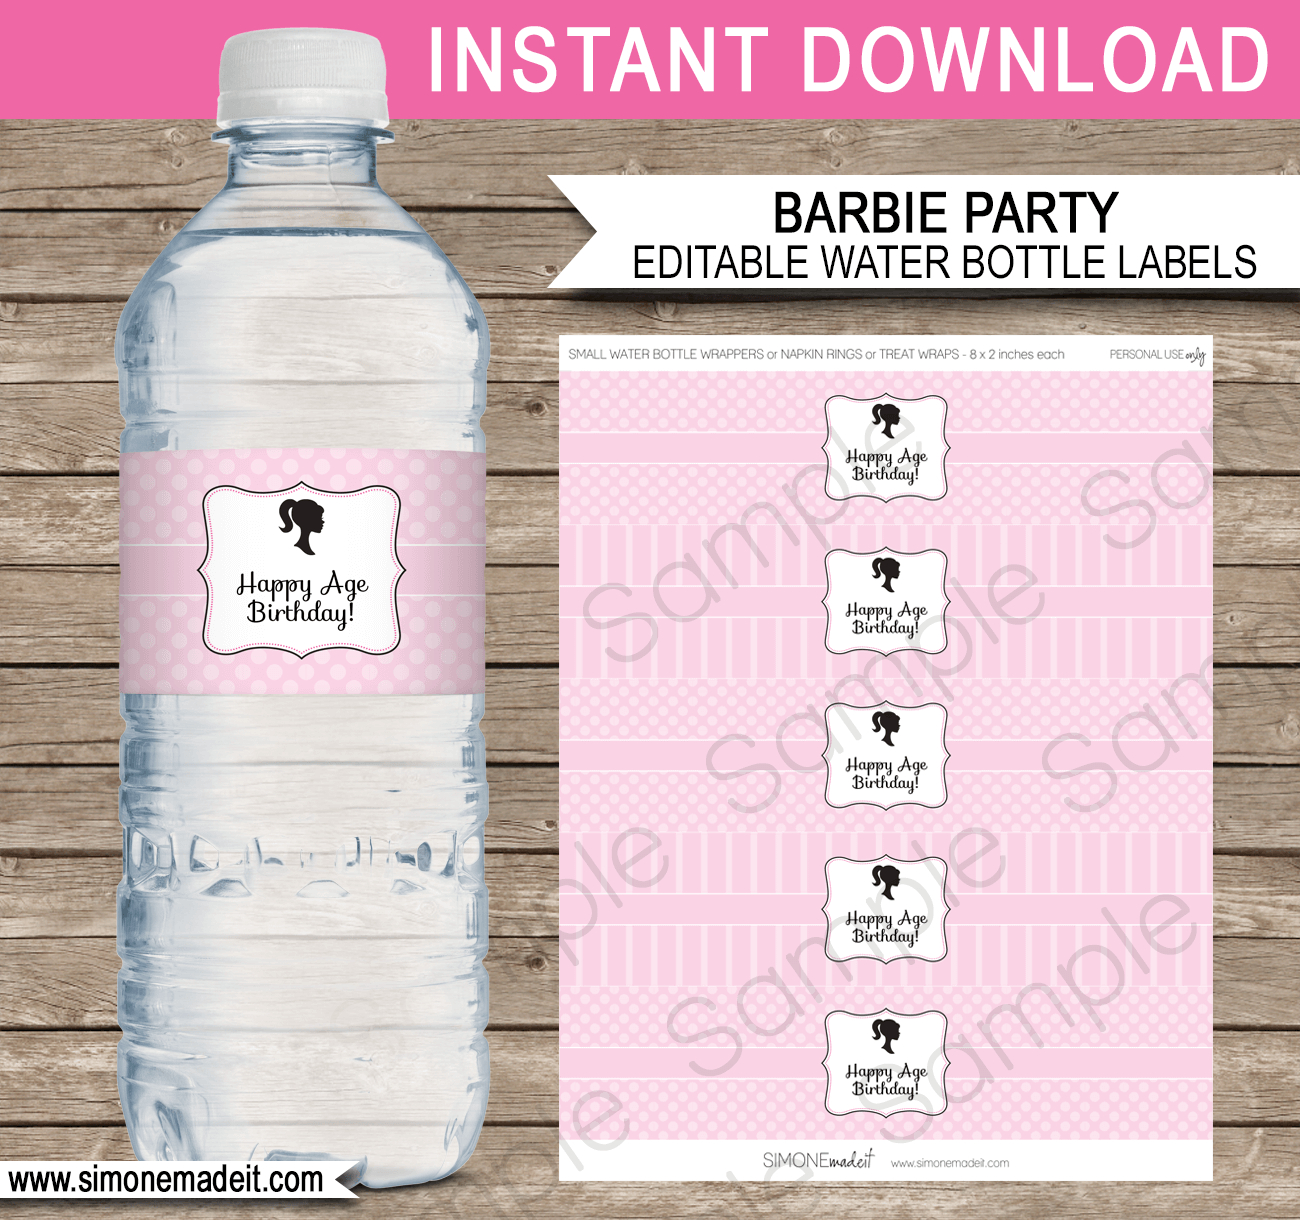 Barbie Party Water Bottle Labels Template throughout Diy Water Bottle Label Template